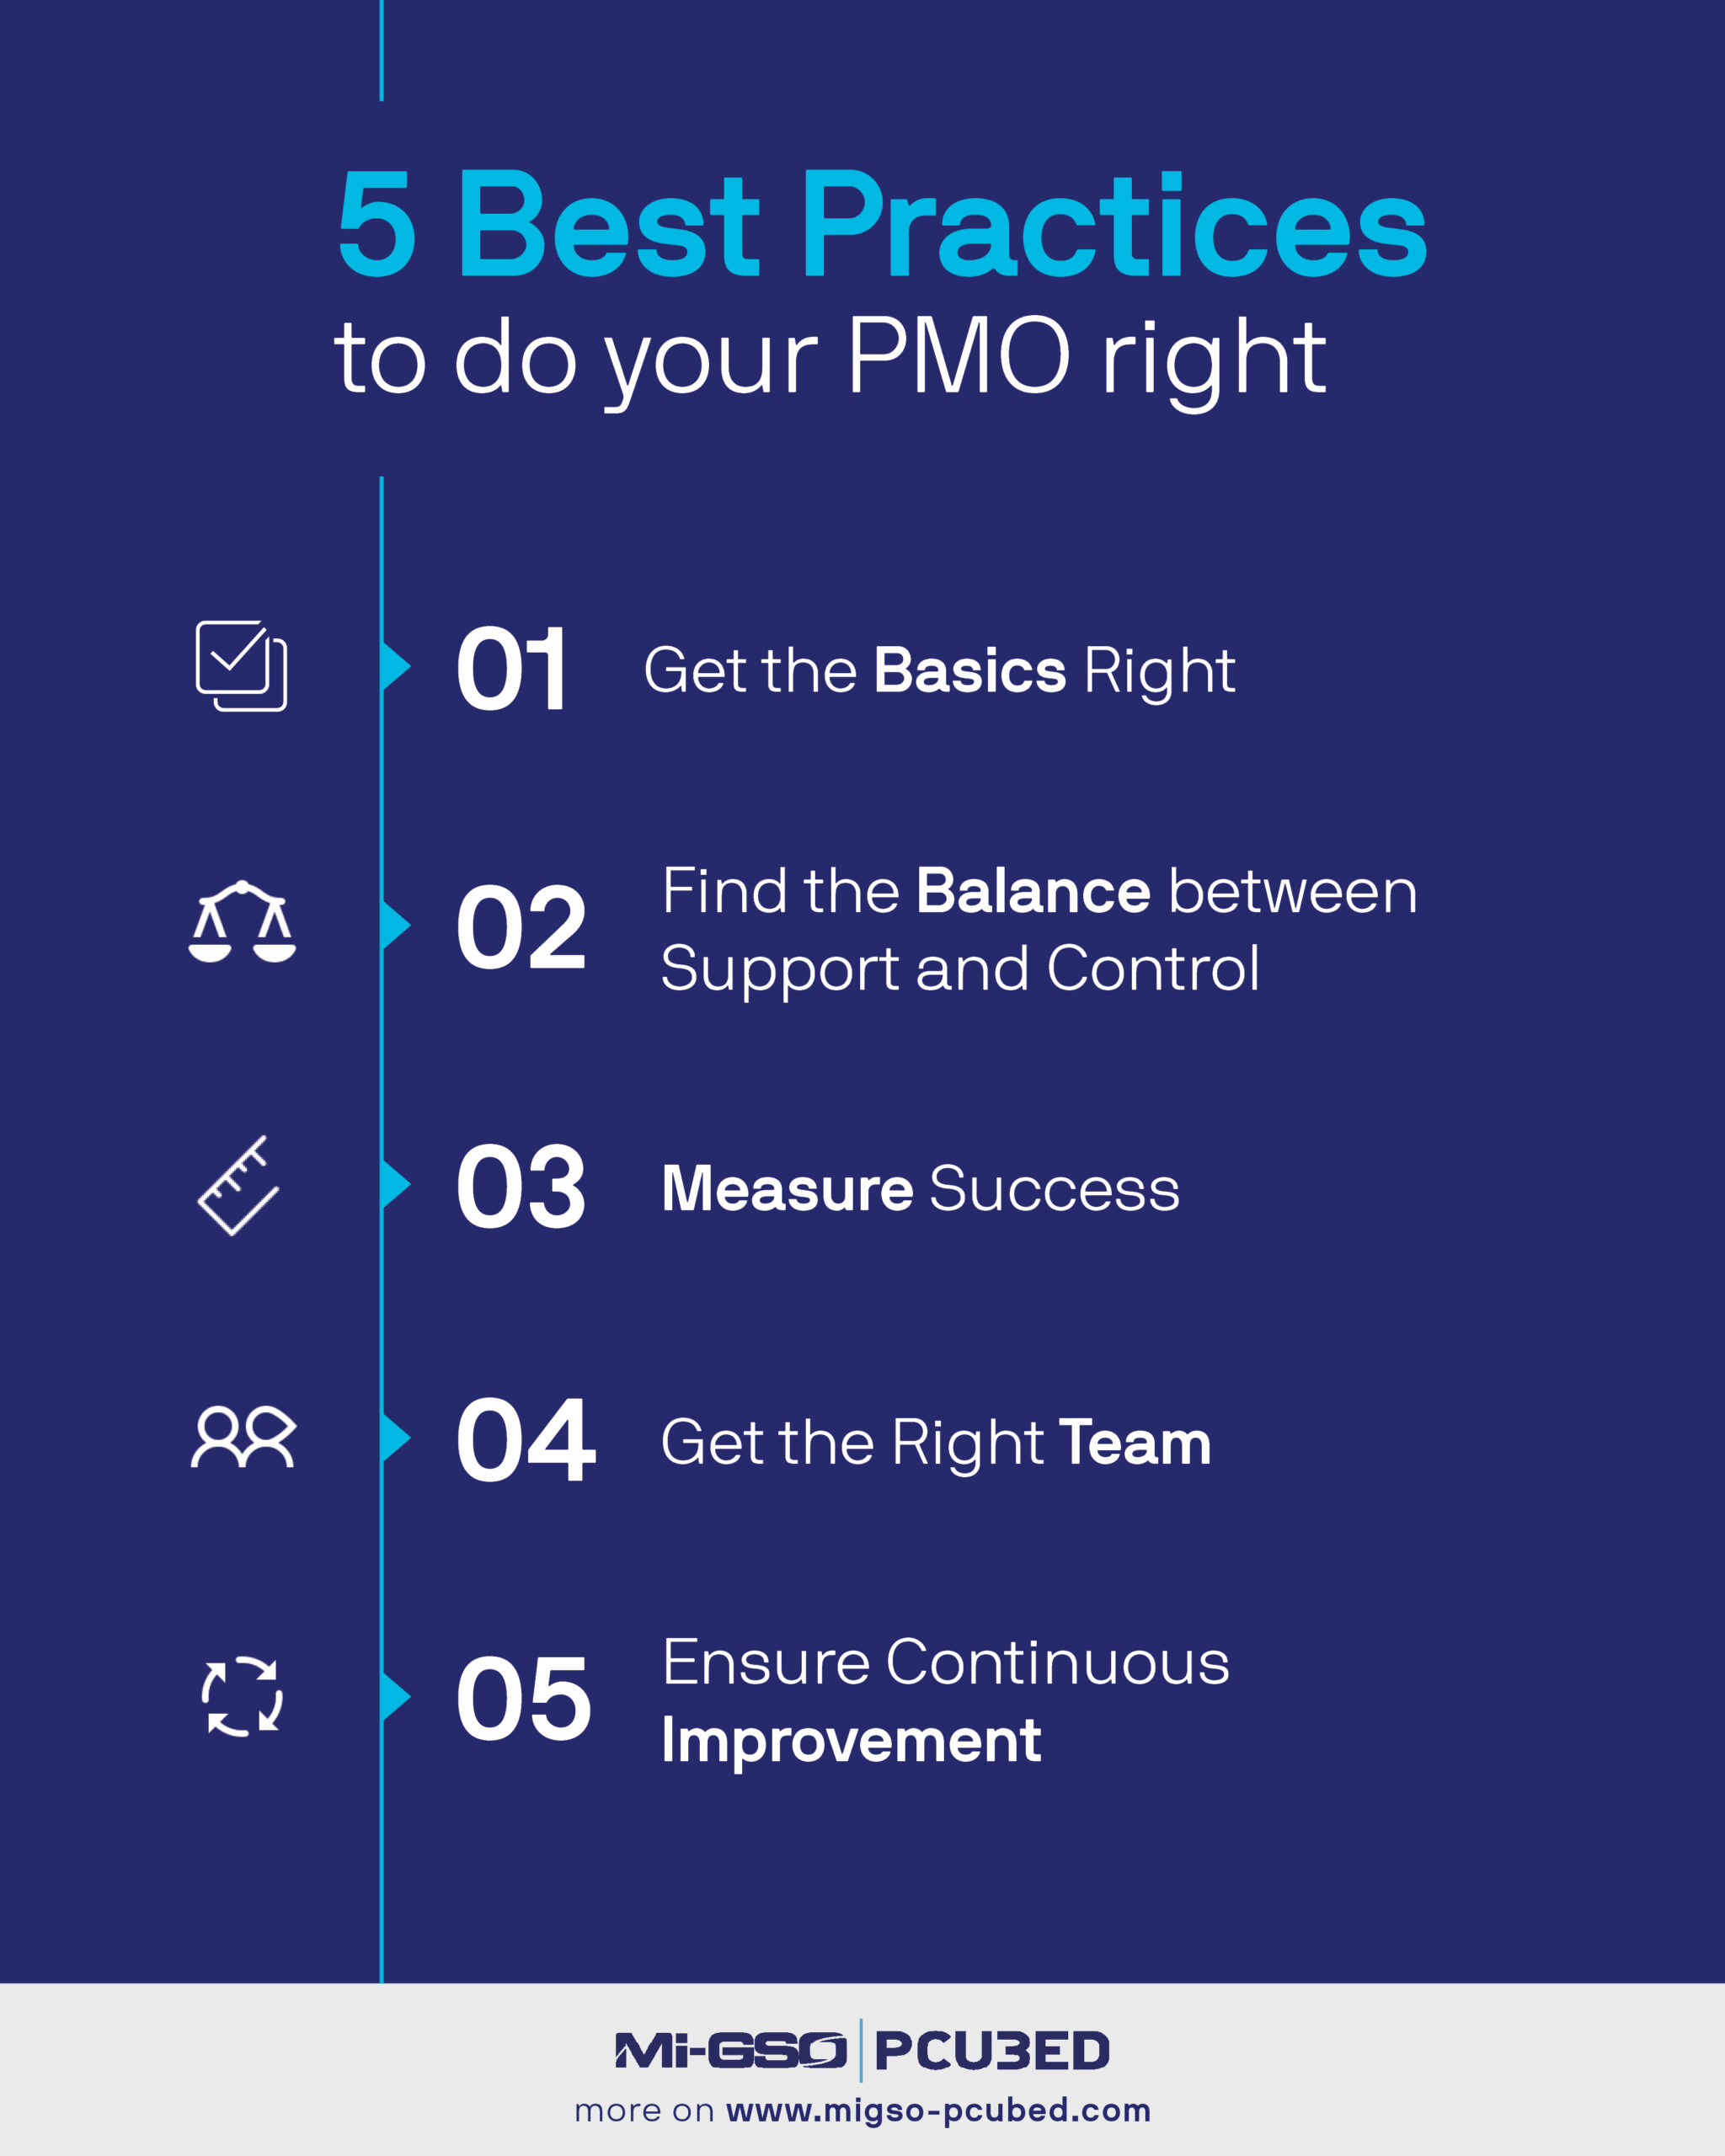 5 Best Practices for a Great PMO